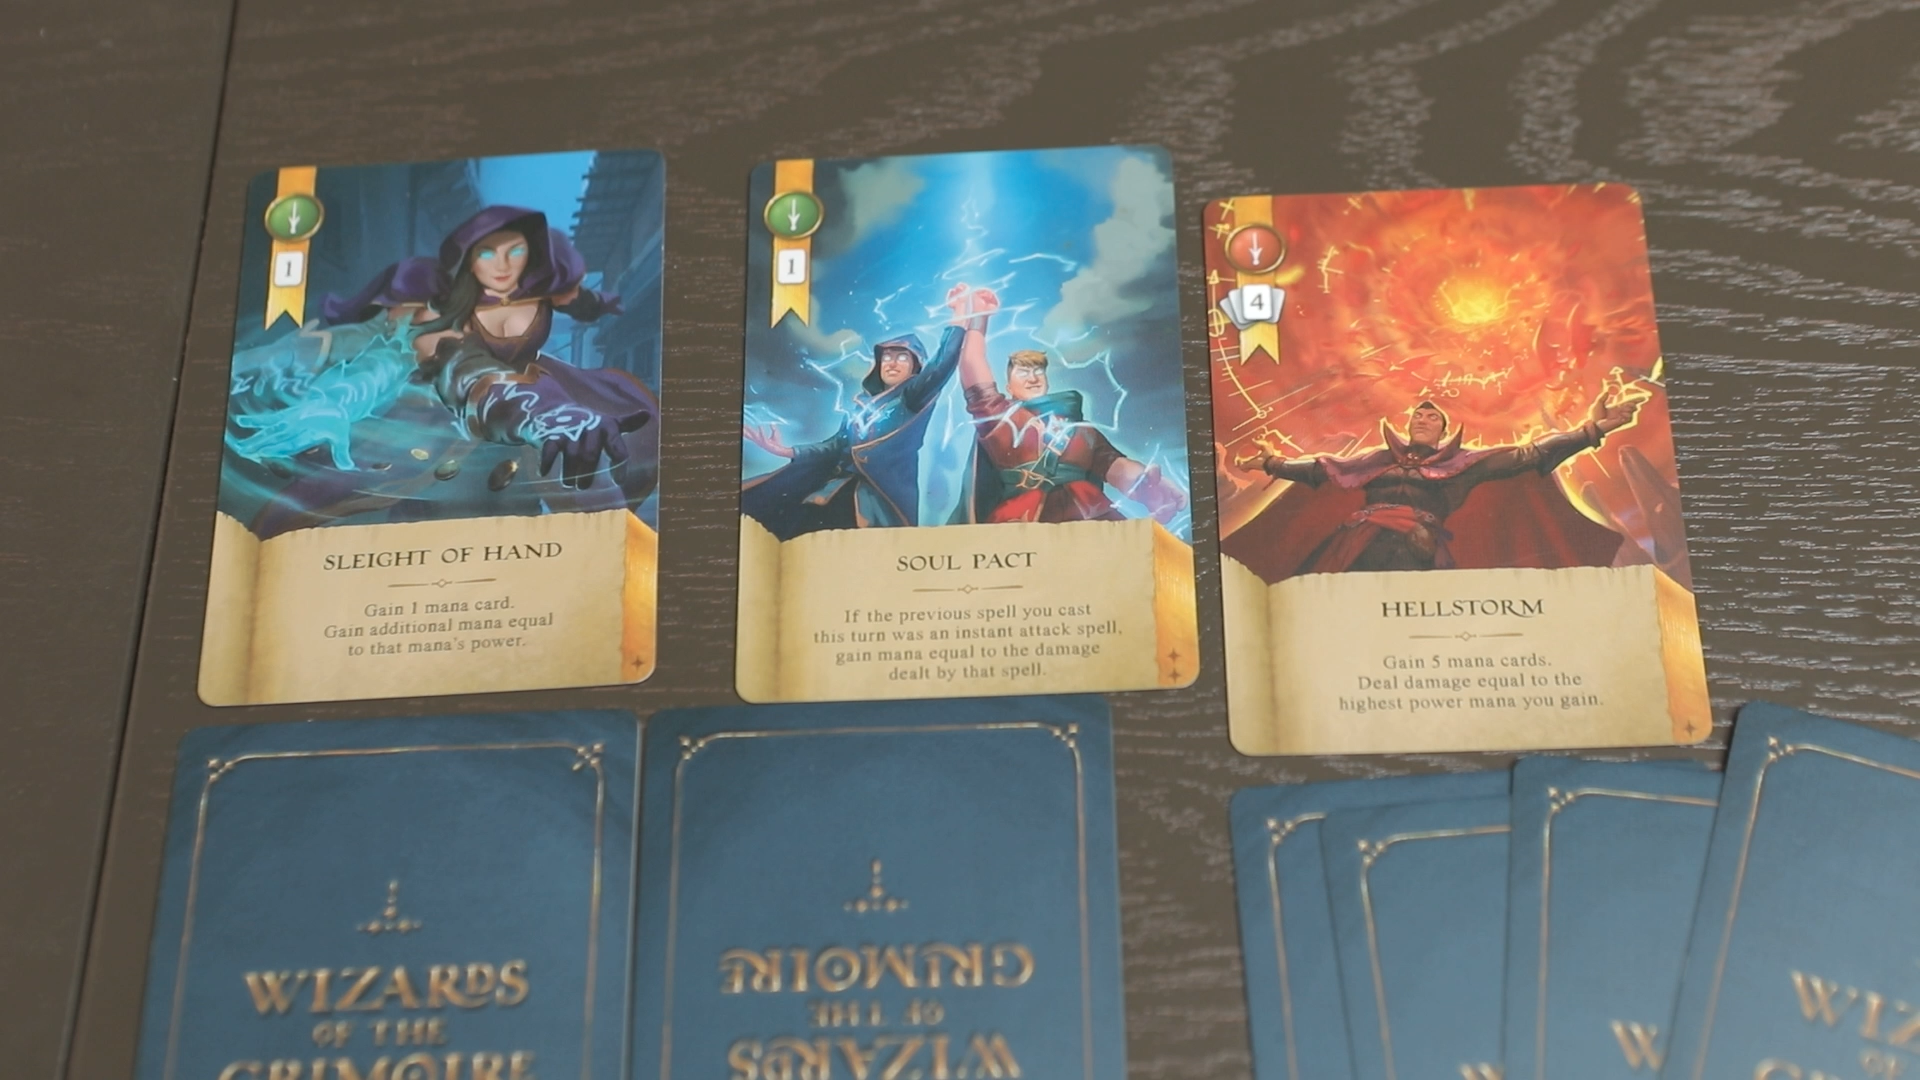 Wizards of the Grimoire Game Review — Meeple Mountain